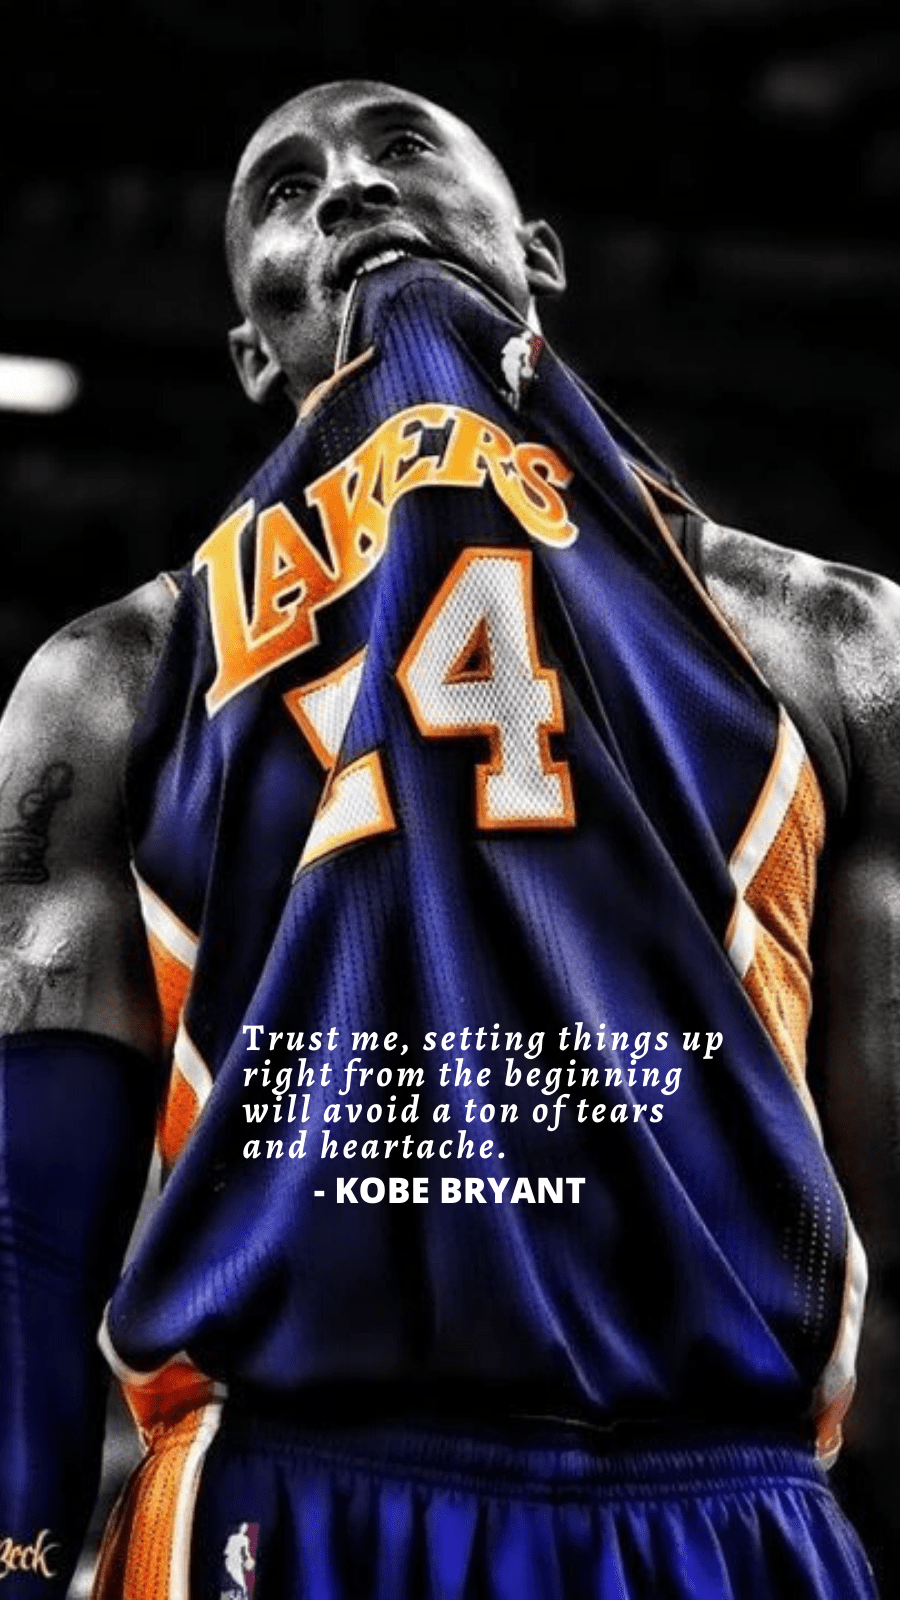 Kobe Bryant Wallpaper From Famous Kobe Quotes. Kobe bryant quotes, Kobe quotes, Kobe bryant wallpaper